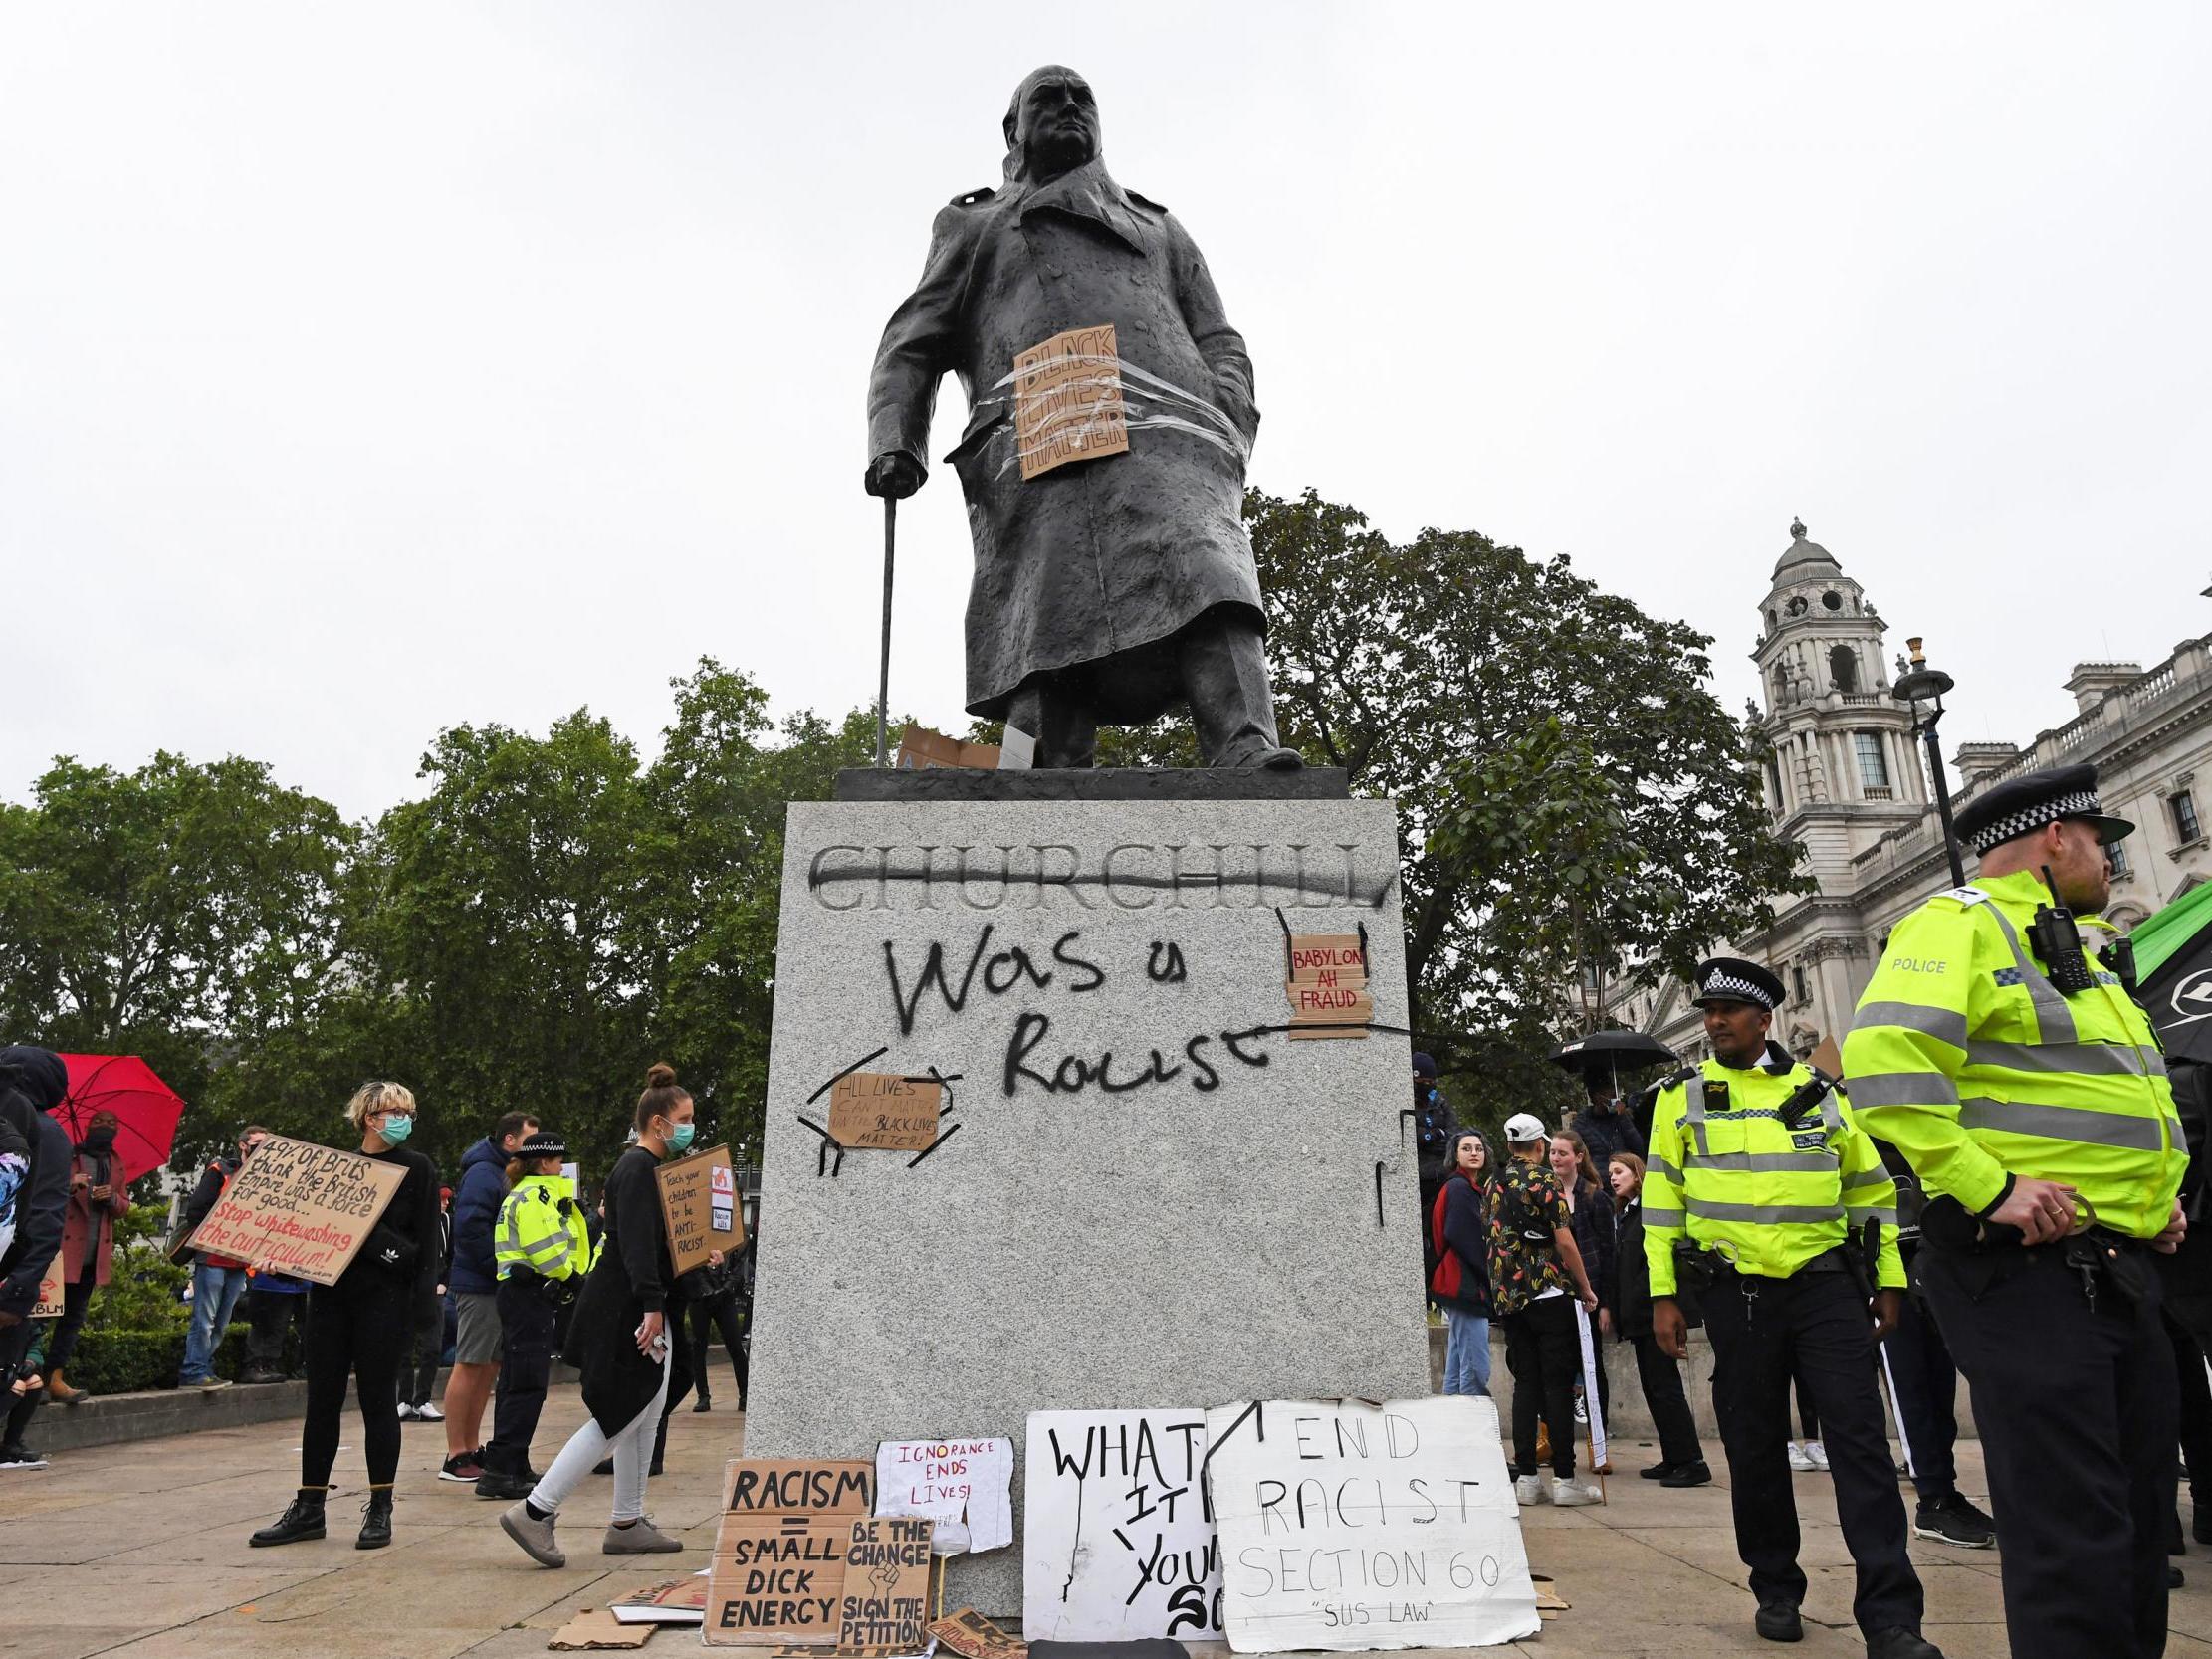 The defaced Churchill statue in central London